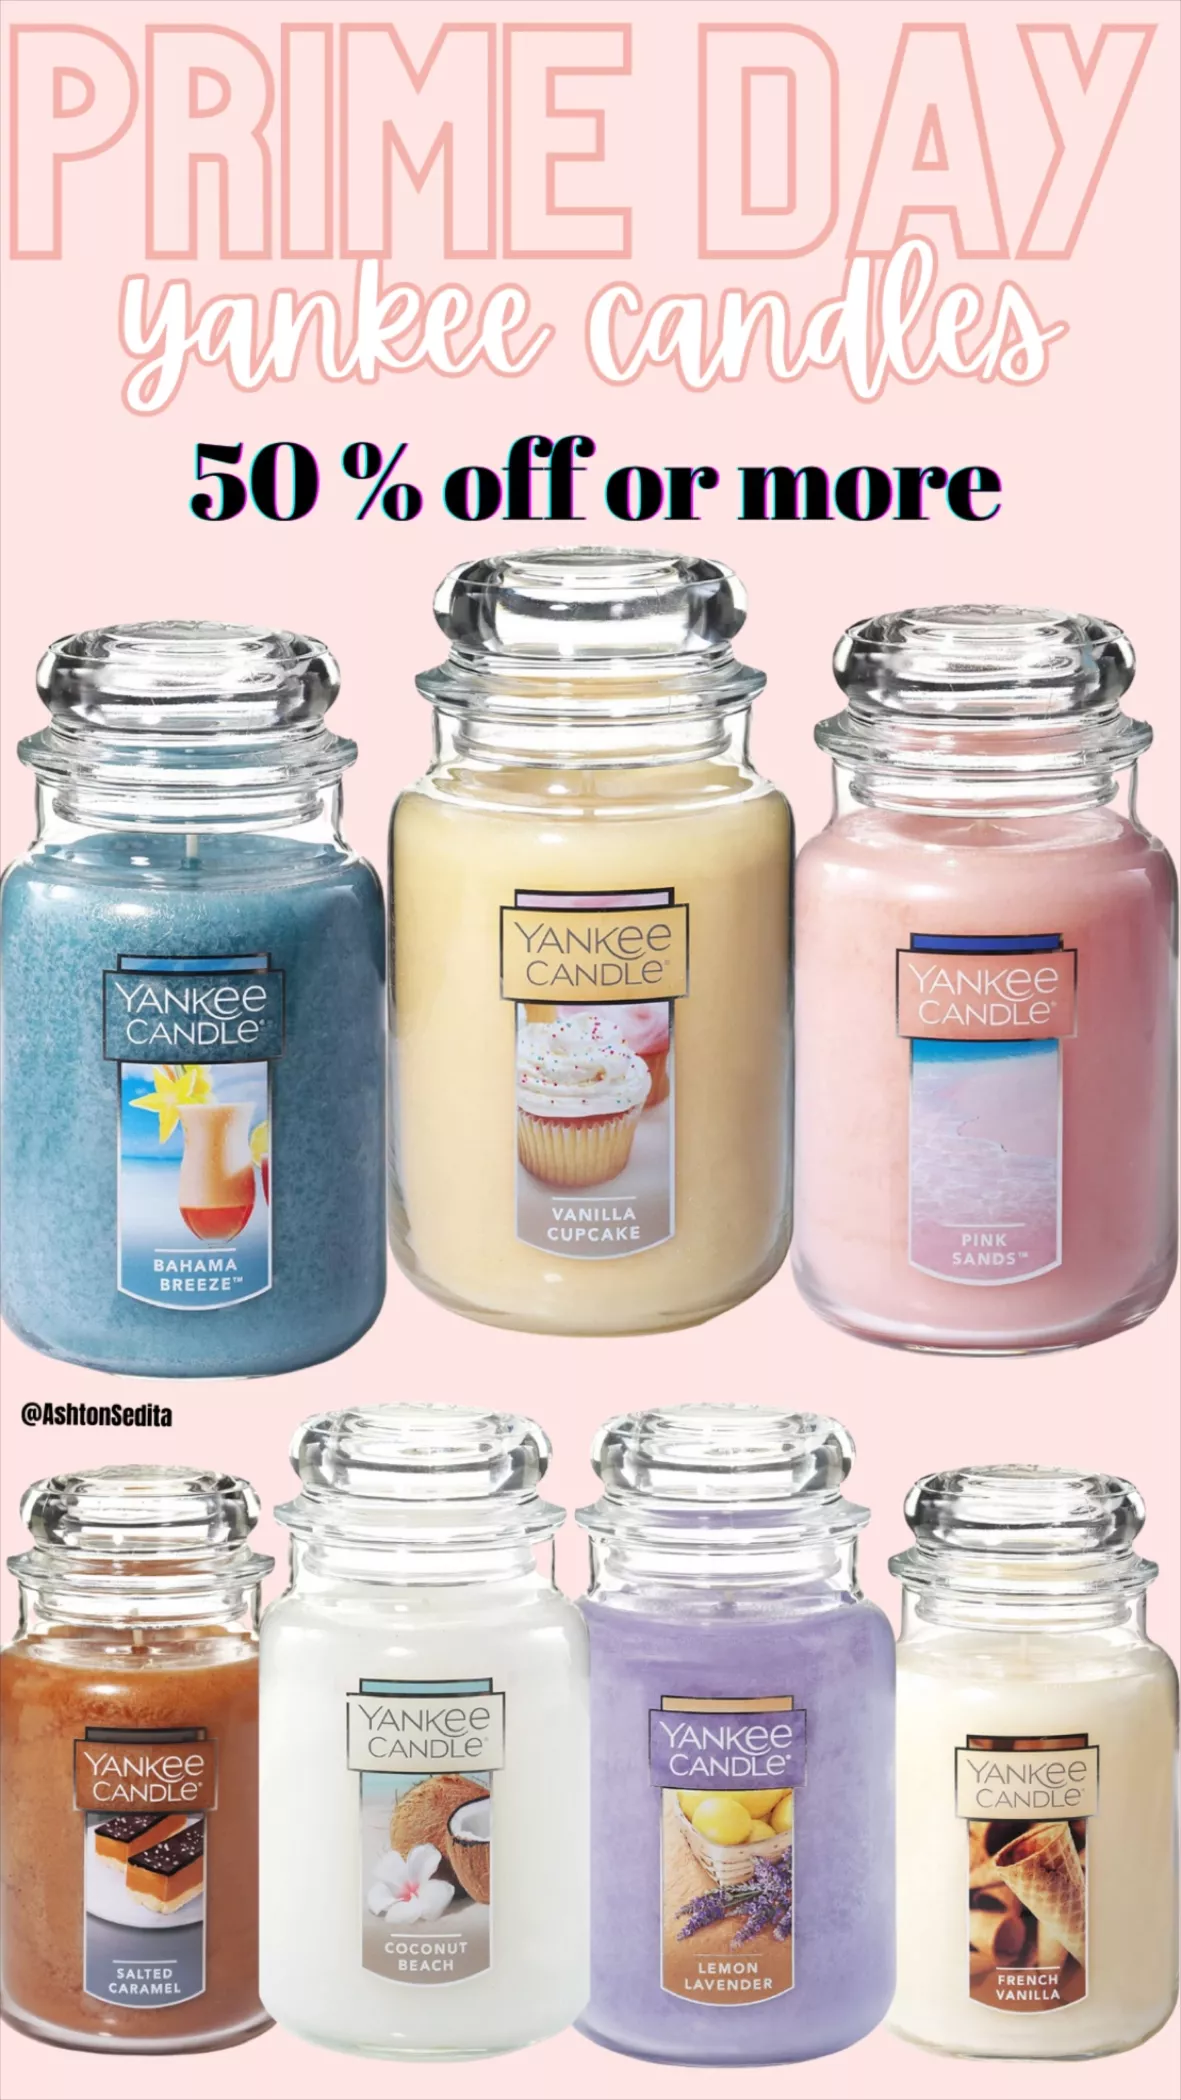 Yankee Candle Pink Sands Scented, … curated on LTK